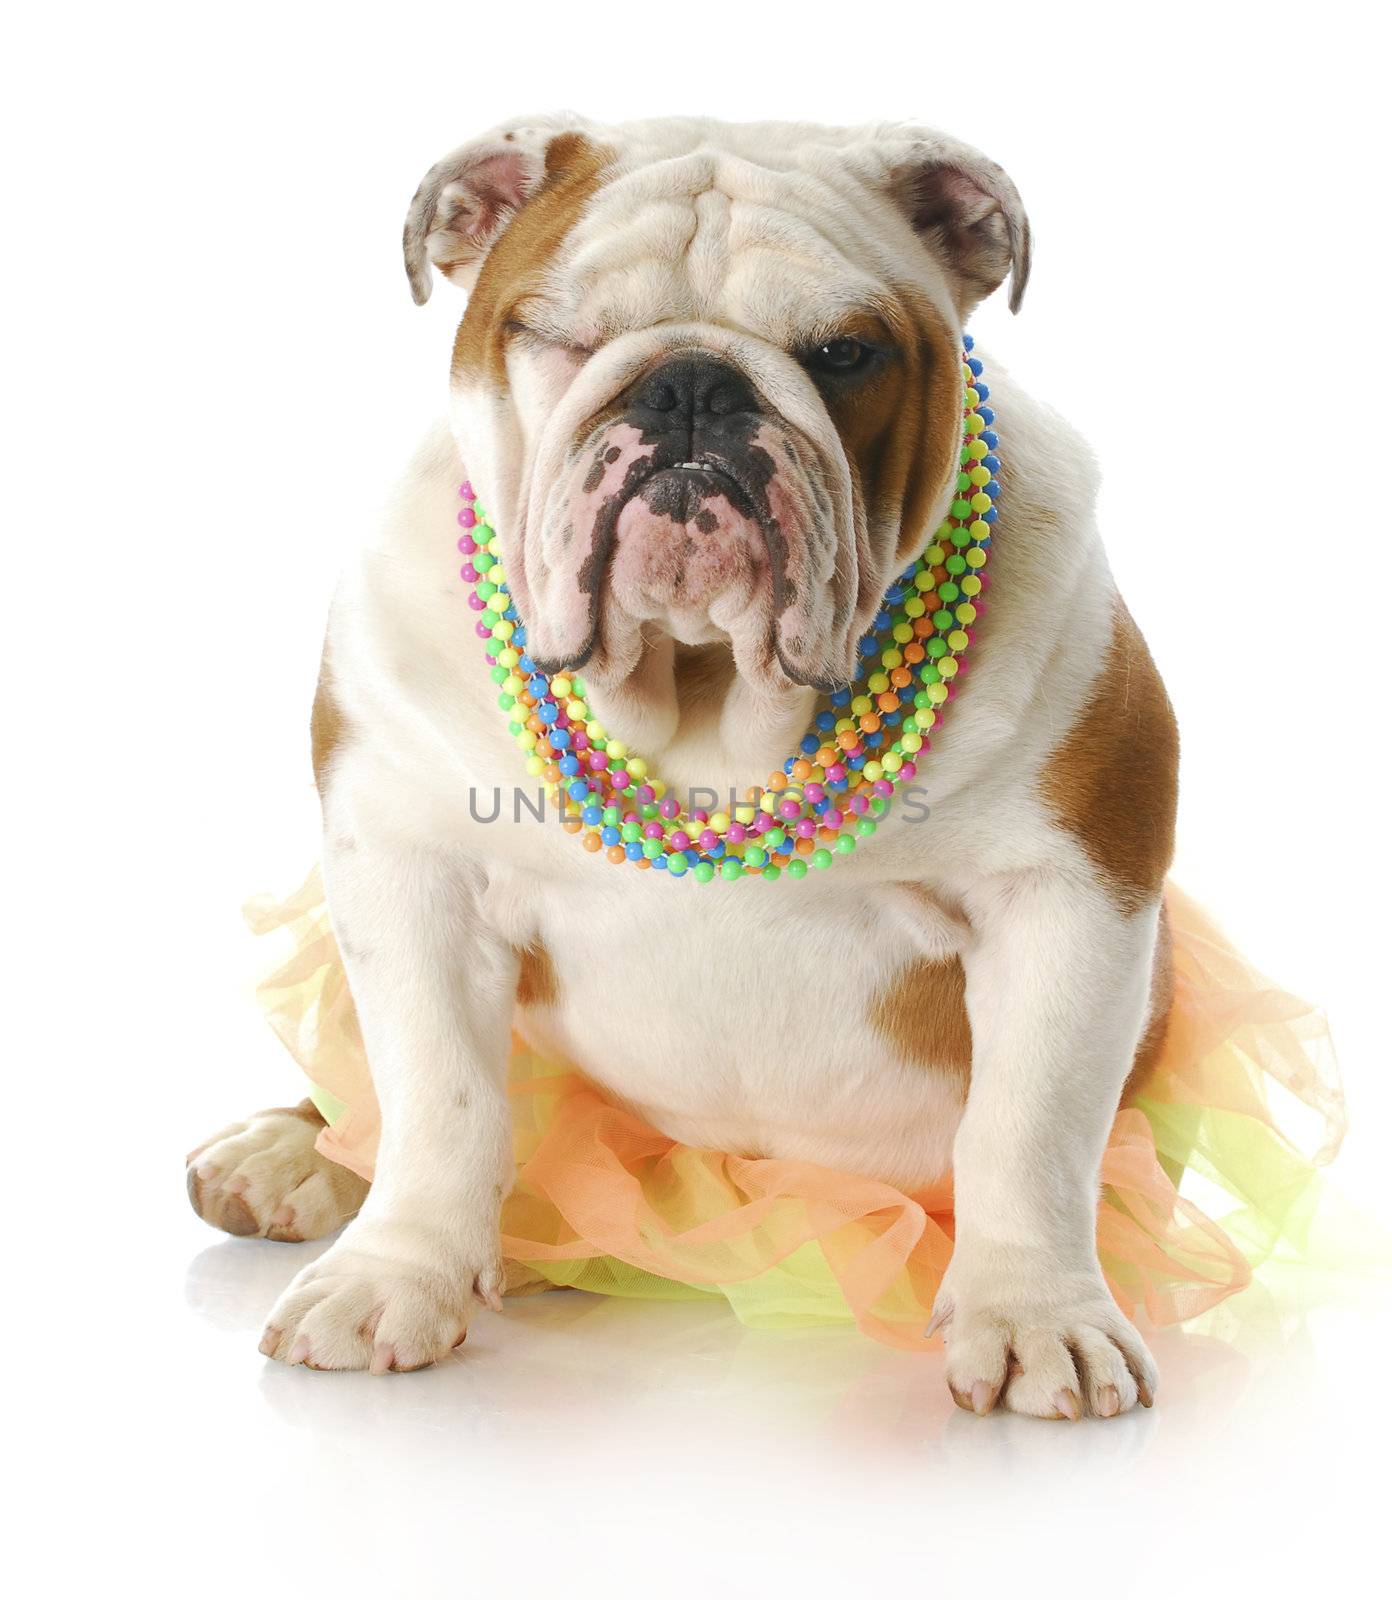 female english bulldog dressed up as a girl winking with reflection on white background